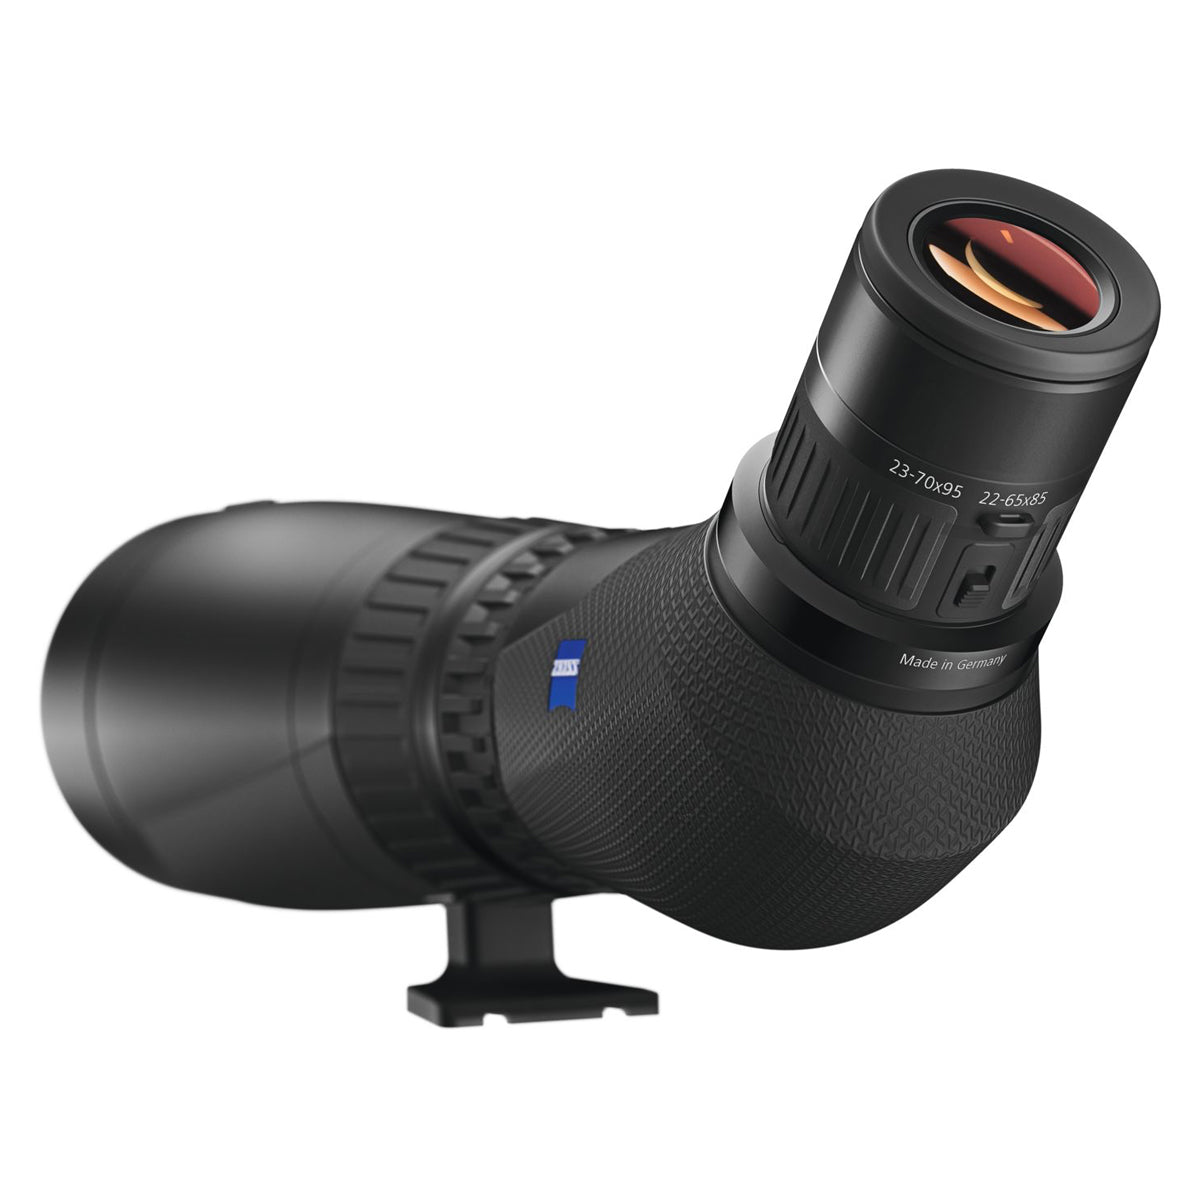 Zeiss Victory Harpia 23-70x95 Angled Spotting Scope in Zeiss Victory Harpia 23-70x95 Angled Spotting Scope by Zeiss | Optics - goHUNT Shop by GOHUNT | Zeiss - GOHUNT Shop